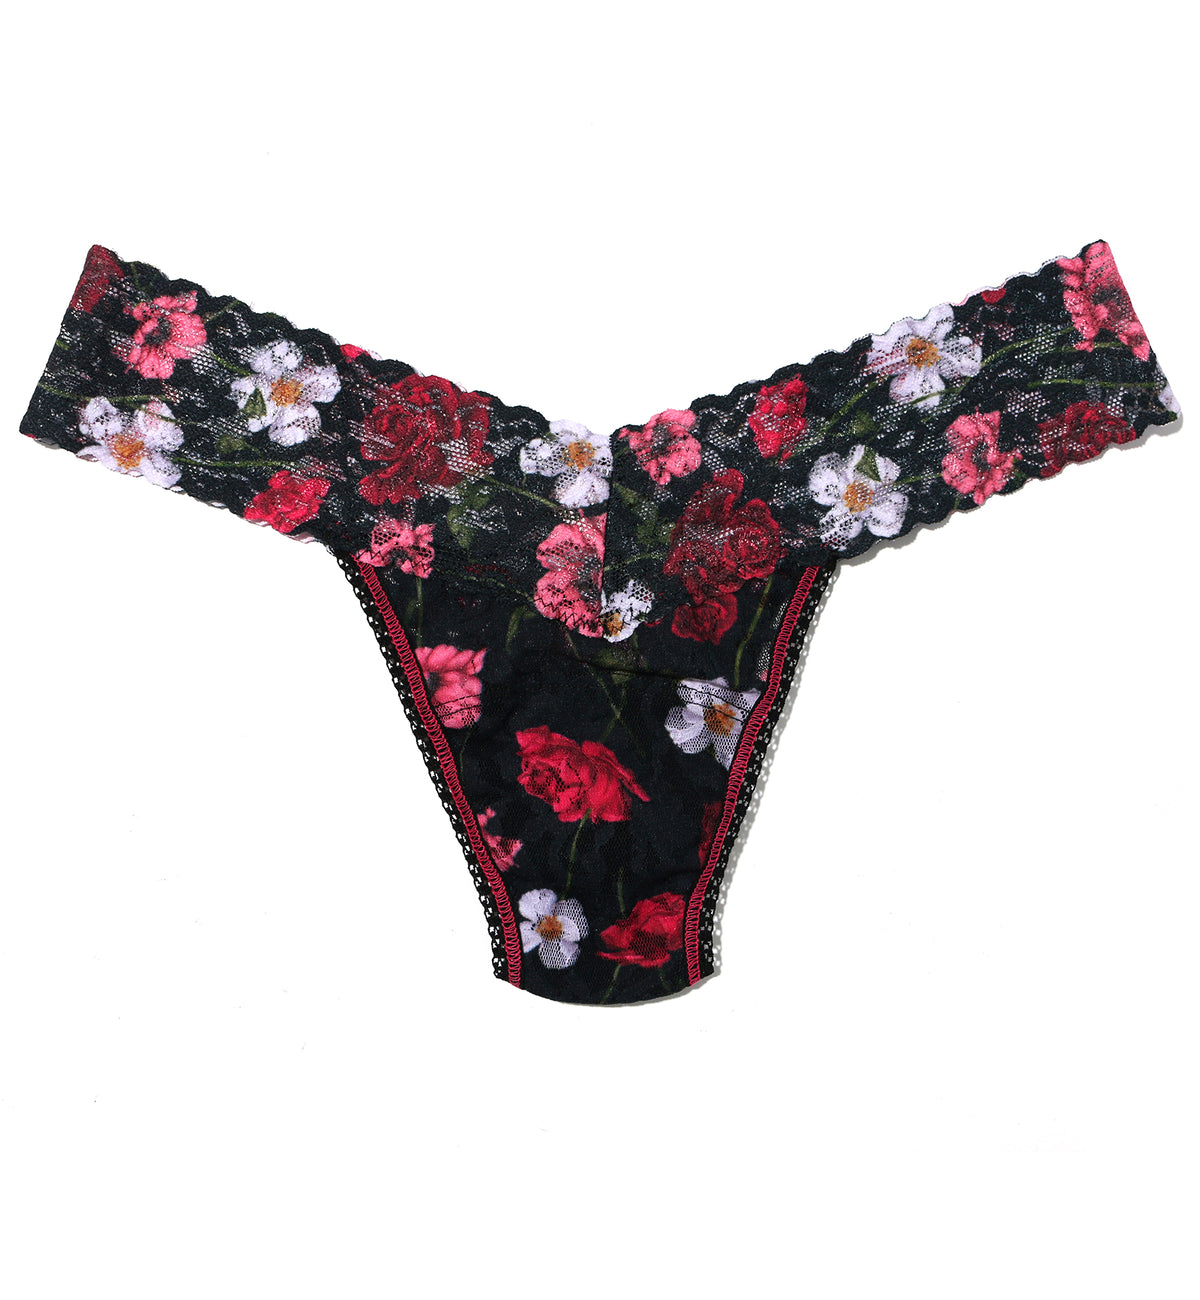 Hanky Panky Signature Lace Printed Low Rise Thong (PR4911P),Am I Dreaming - Am I Dreaming,One Size